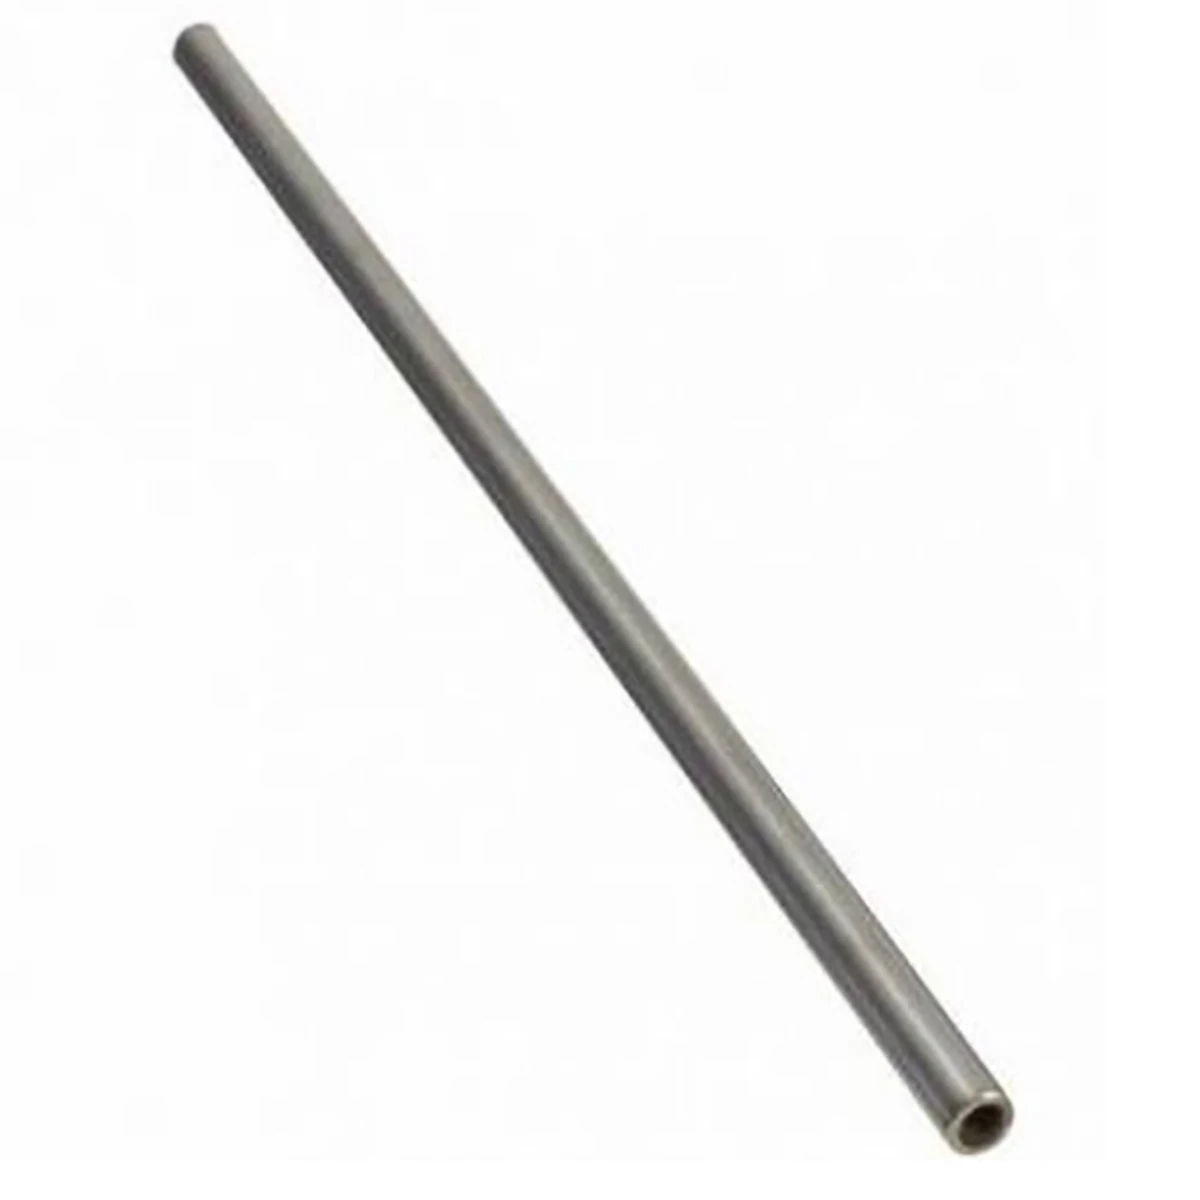 2pcs New Capillary Tube 304 Stainless Seamless Steel with Wear Resistant 5mm OD 3mm ID 250mm Length